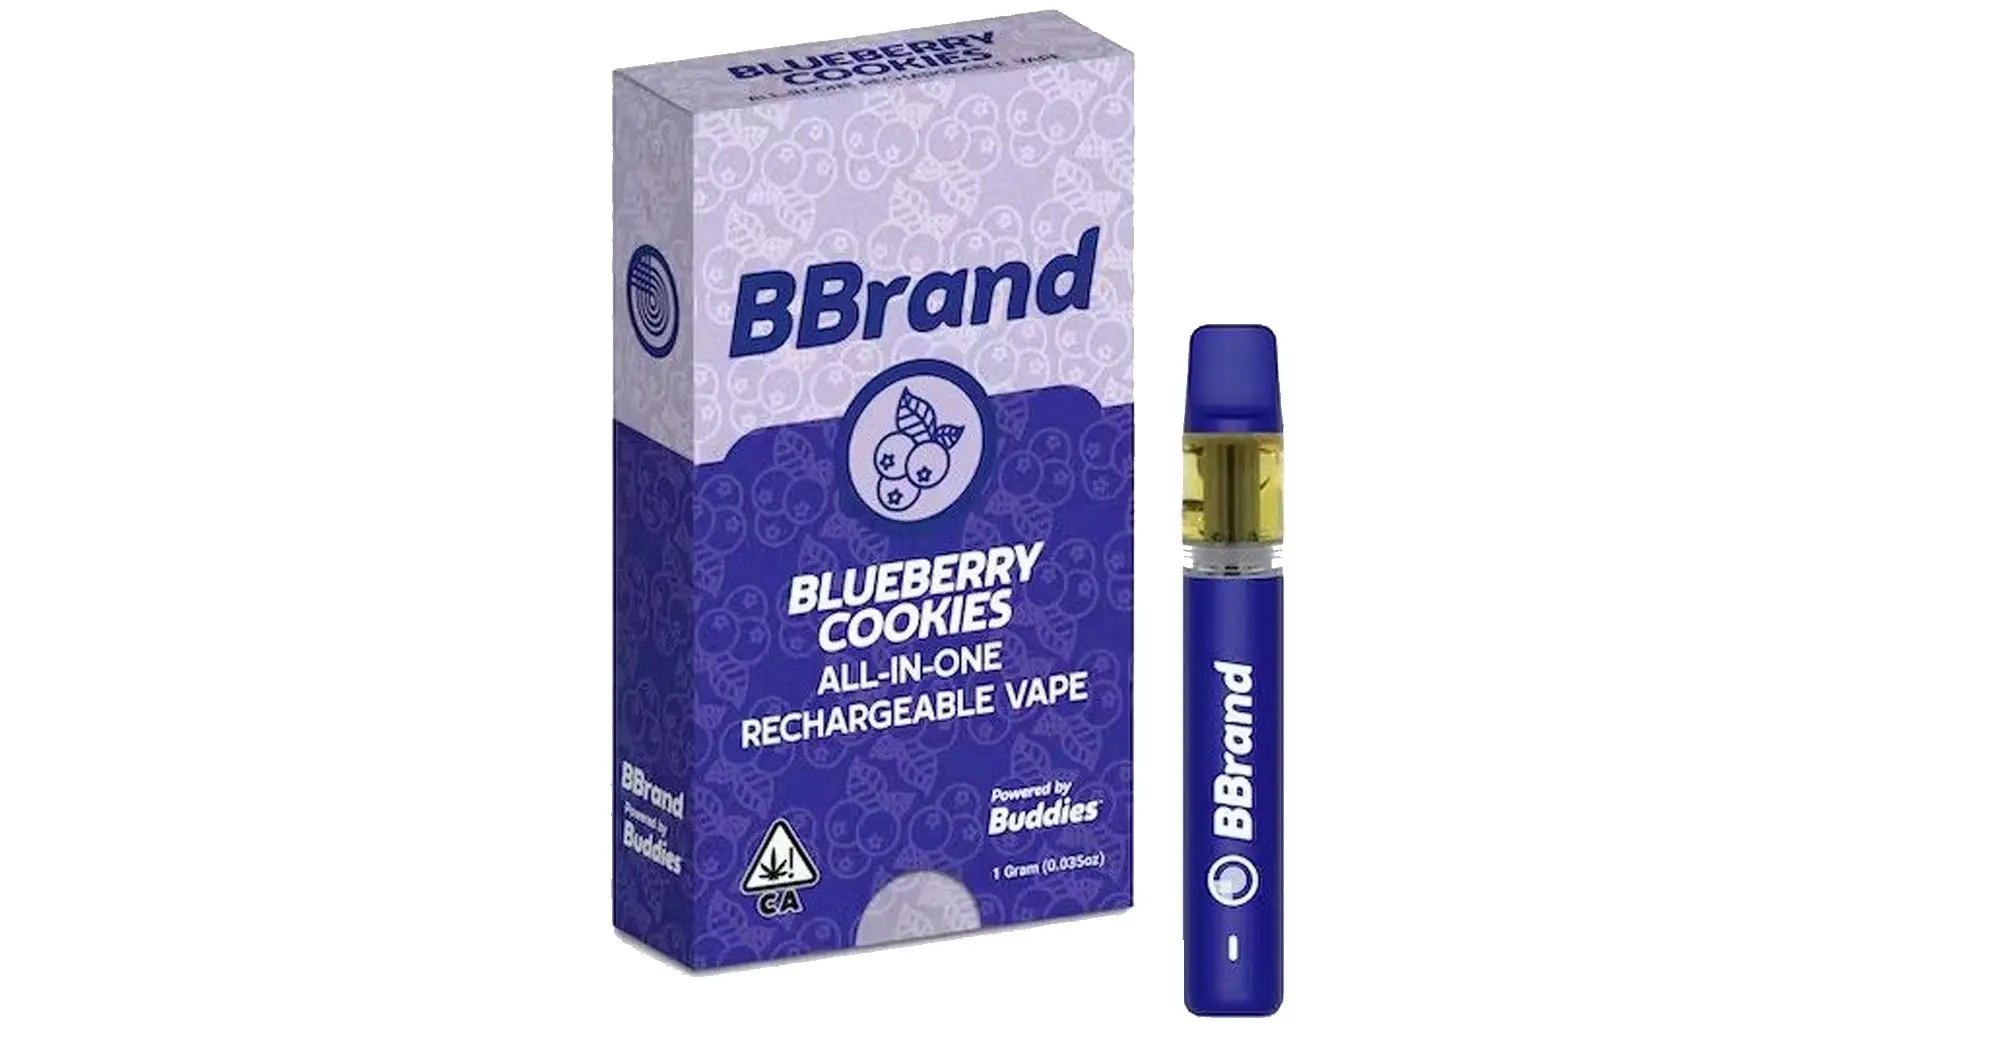 Blueberry Cookies AIO